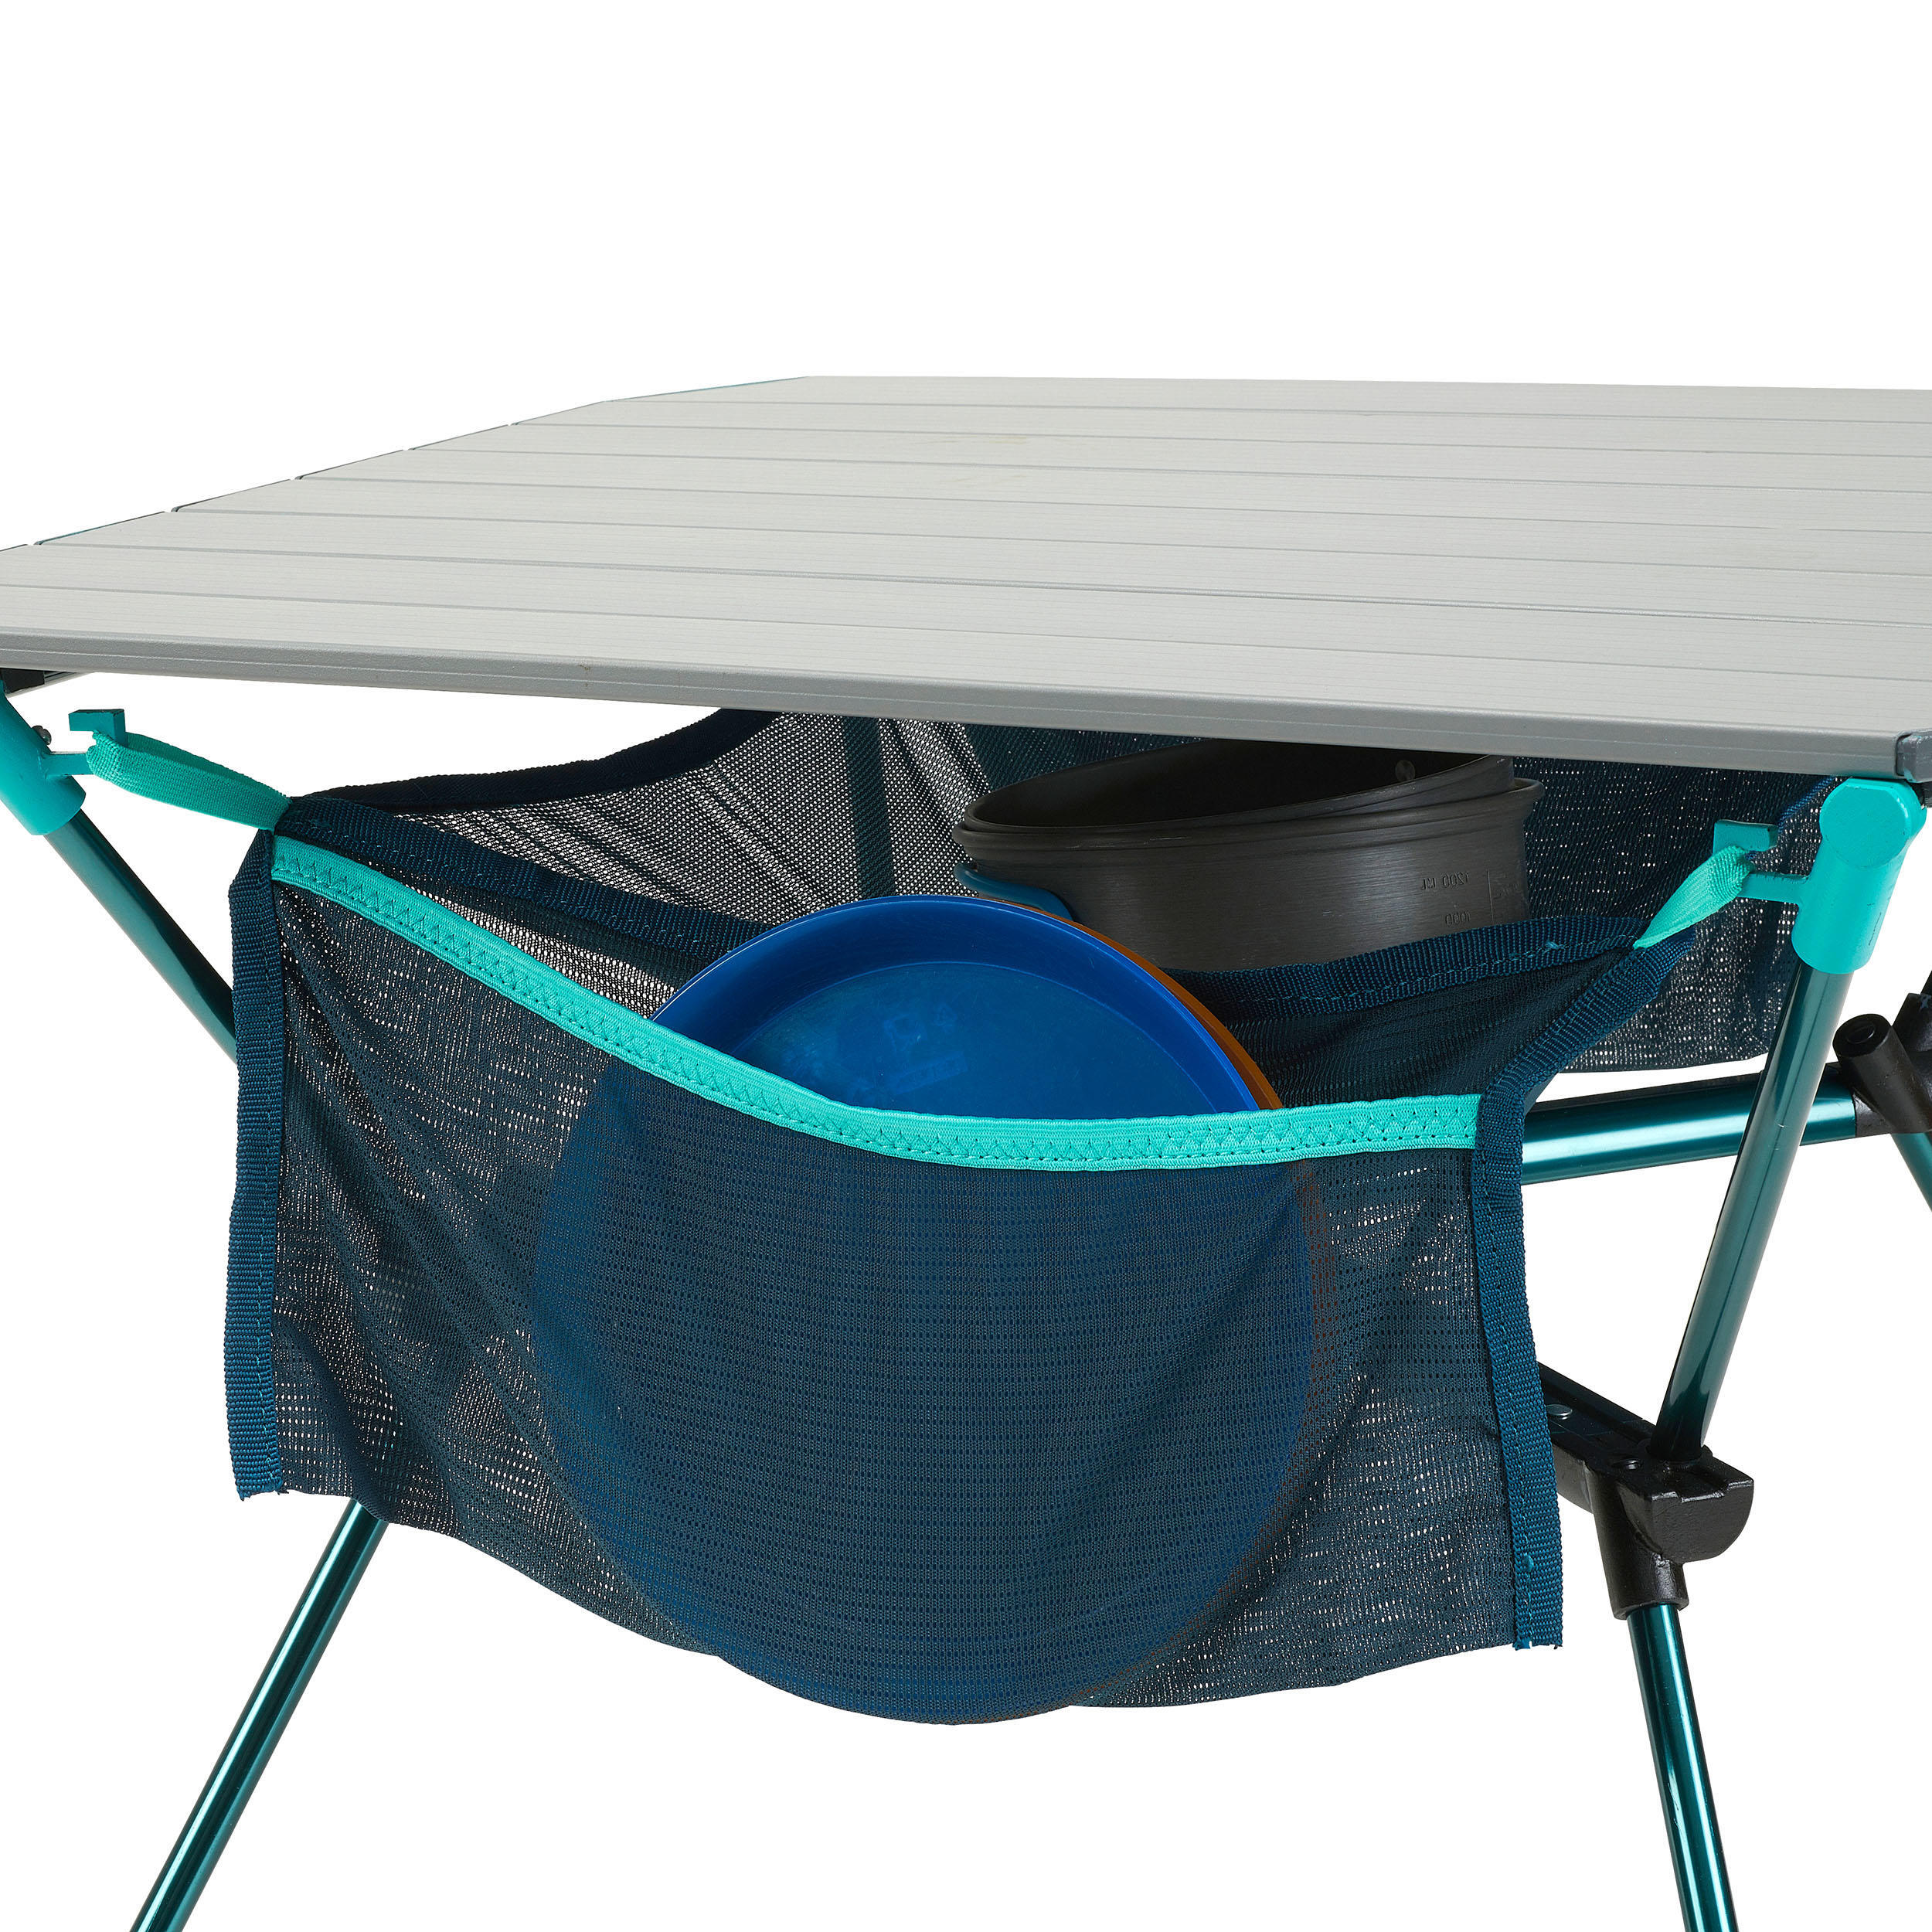 FOLDING CAMPING TABLE - MH500 8/10